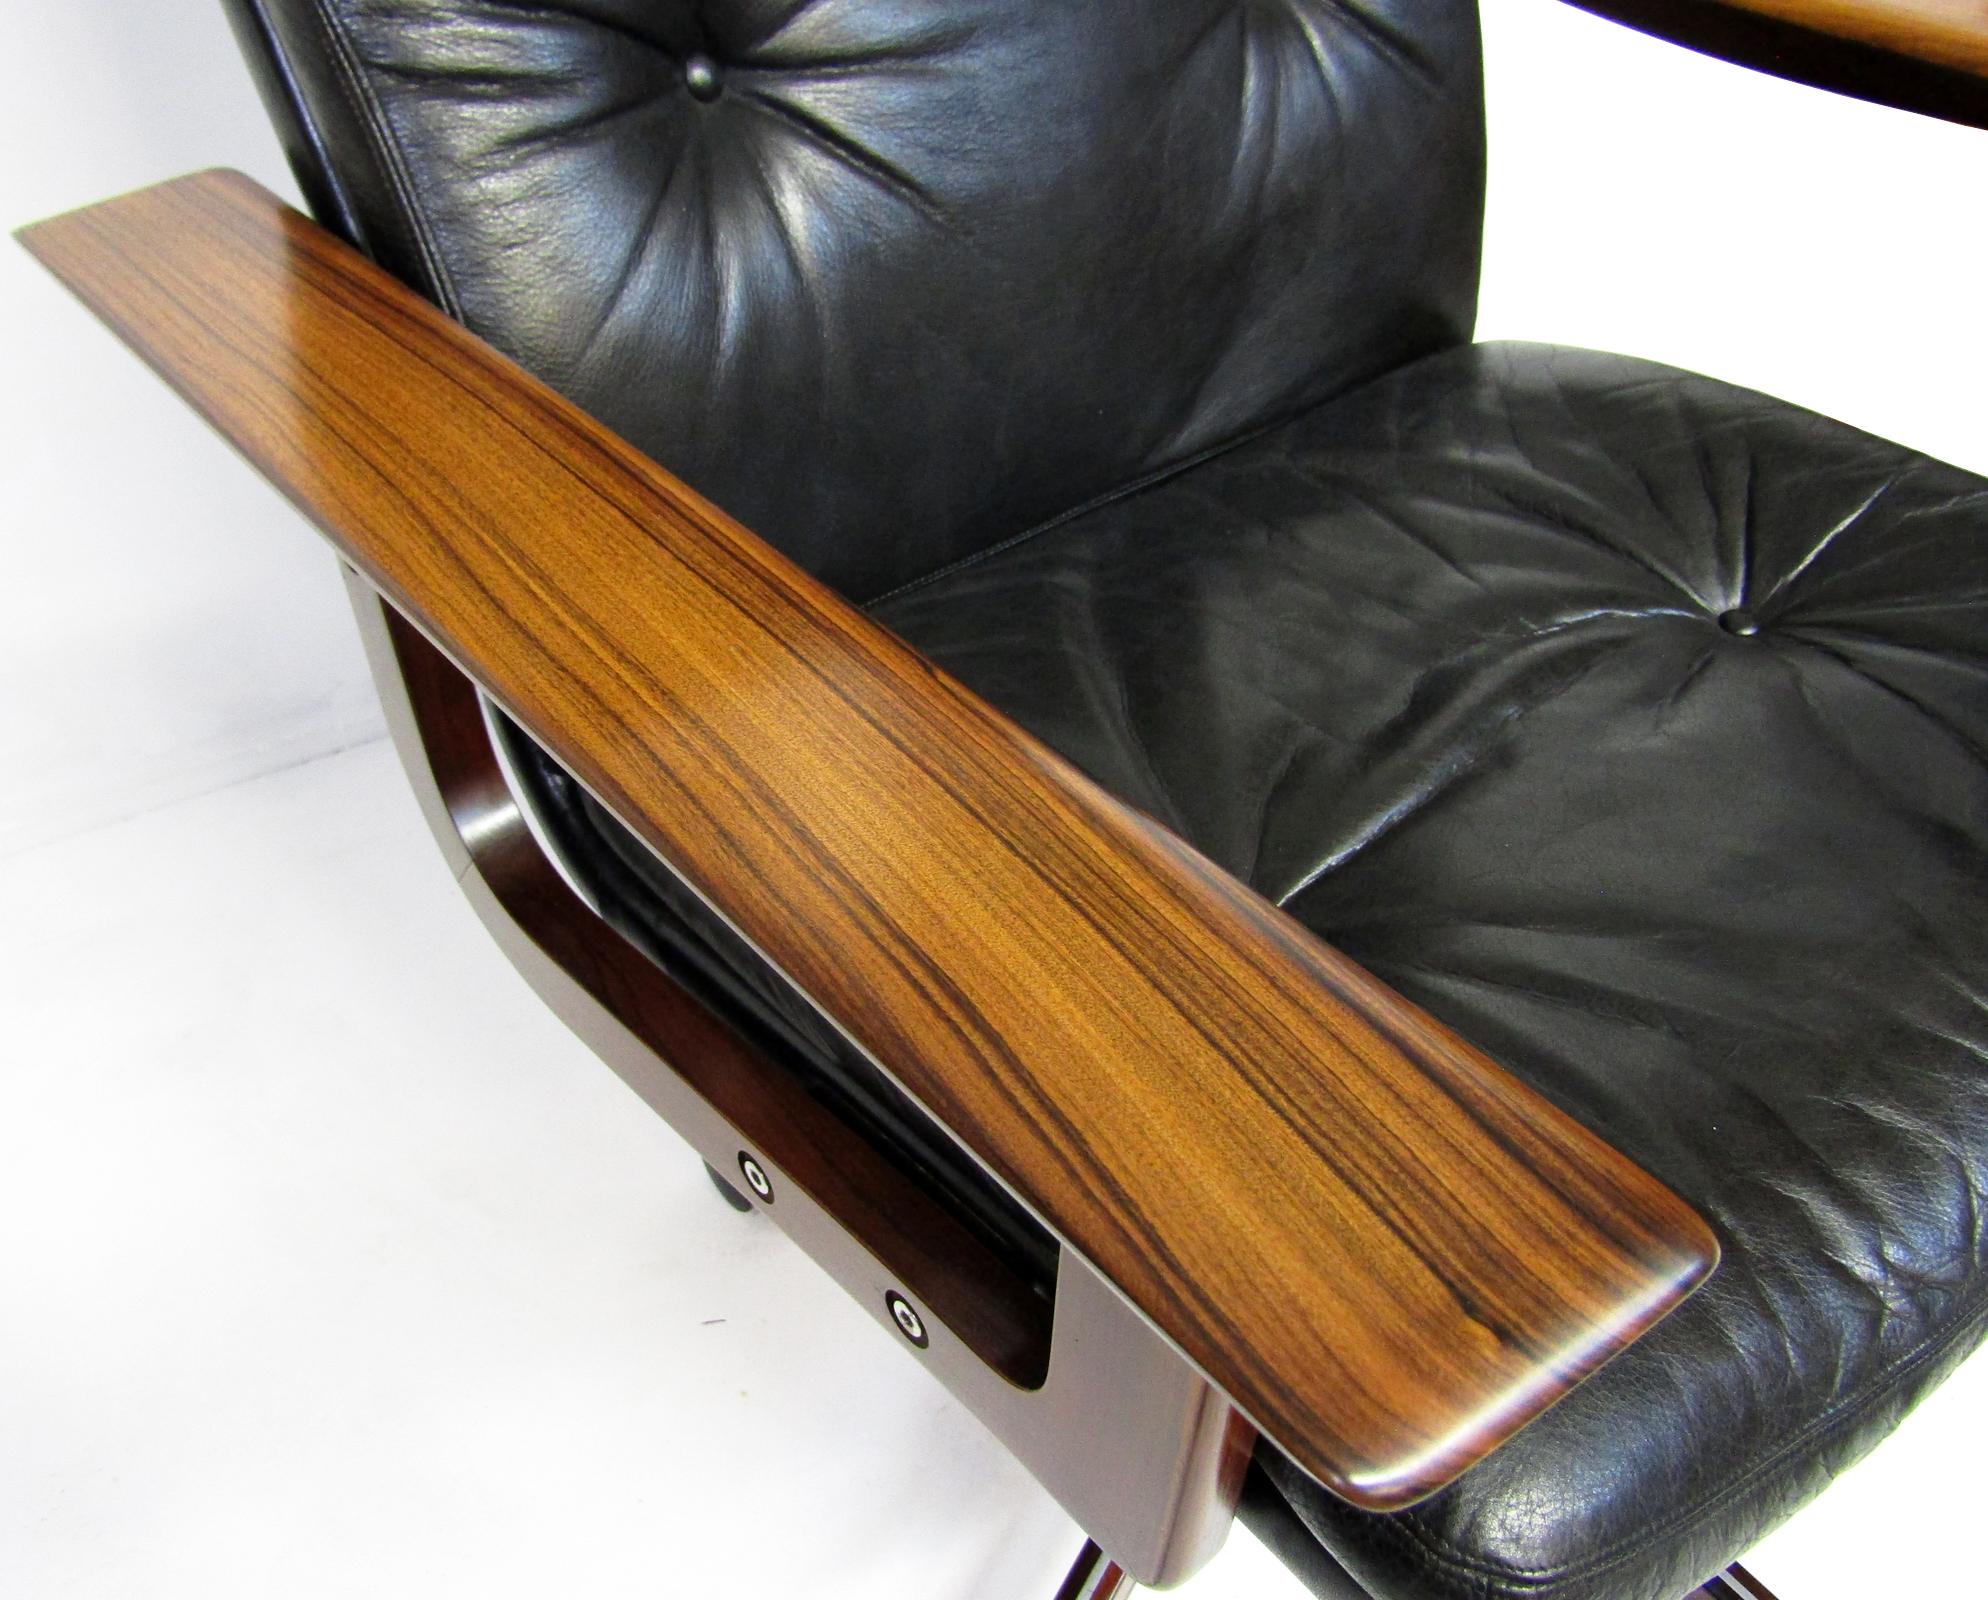 A rare Danish executive swivel chair in leather, rosewood and steel by Arne Vodder for Sibast.

It features torque-adjustable tilt recline, swivel and adjustable height.

Made circa 1960, it is a beautiful example of Danish design. The rosewood arms